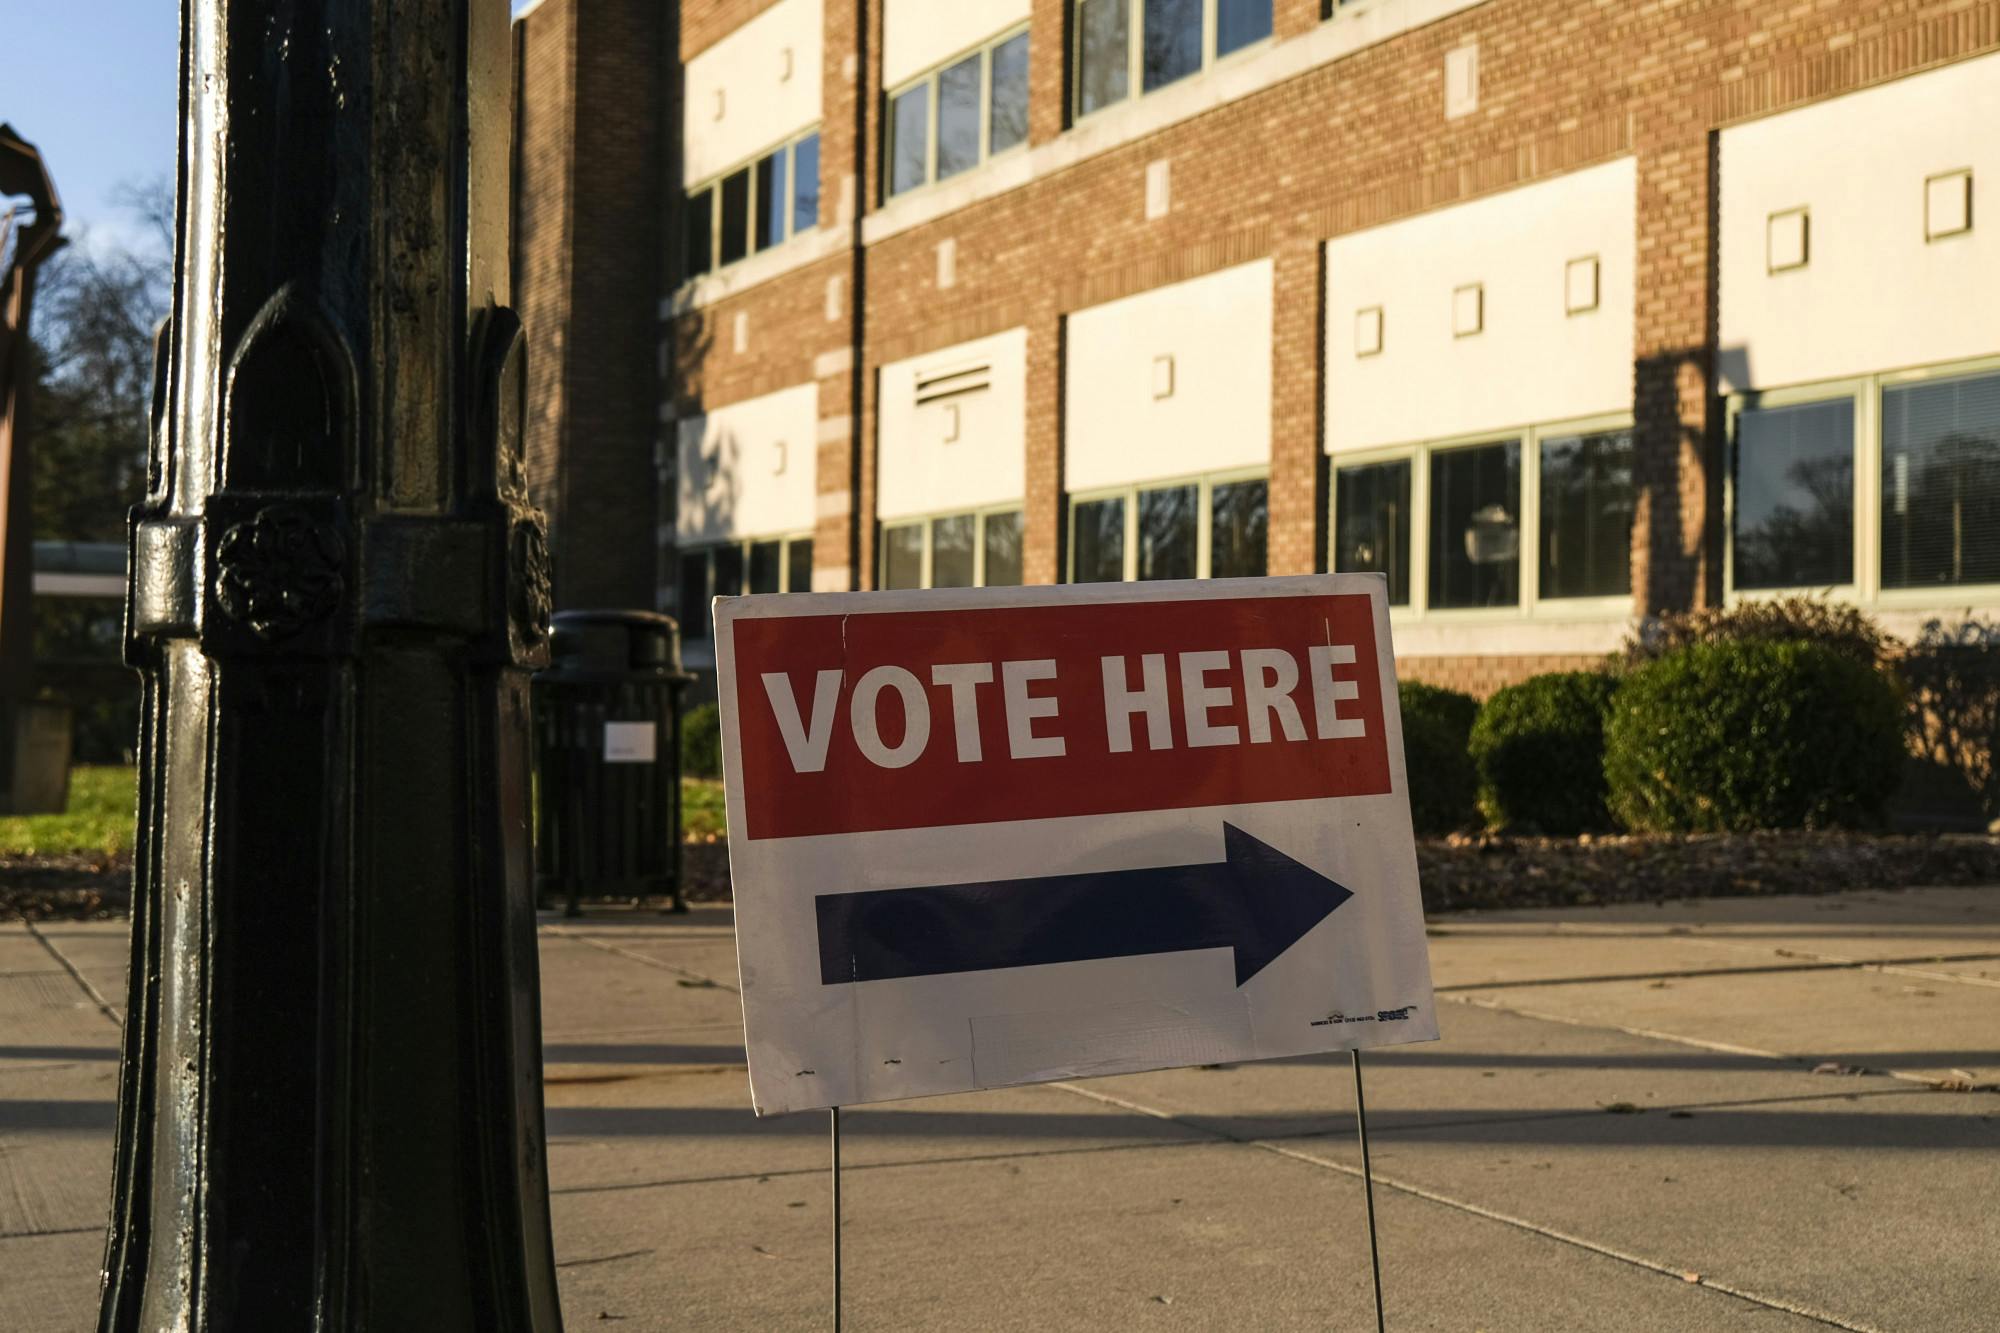 Voters at precinct 3 and 11 can vote at The Hannah Community Center on November 3, 2020.